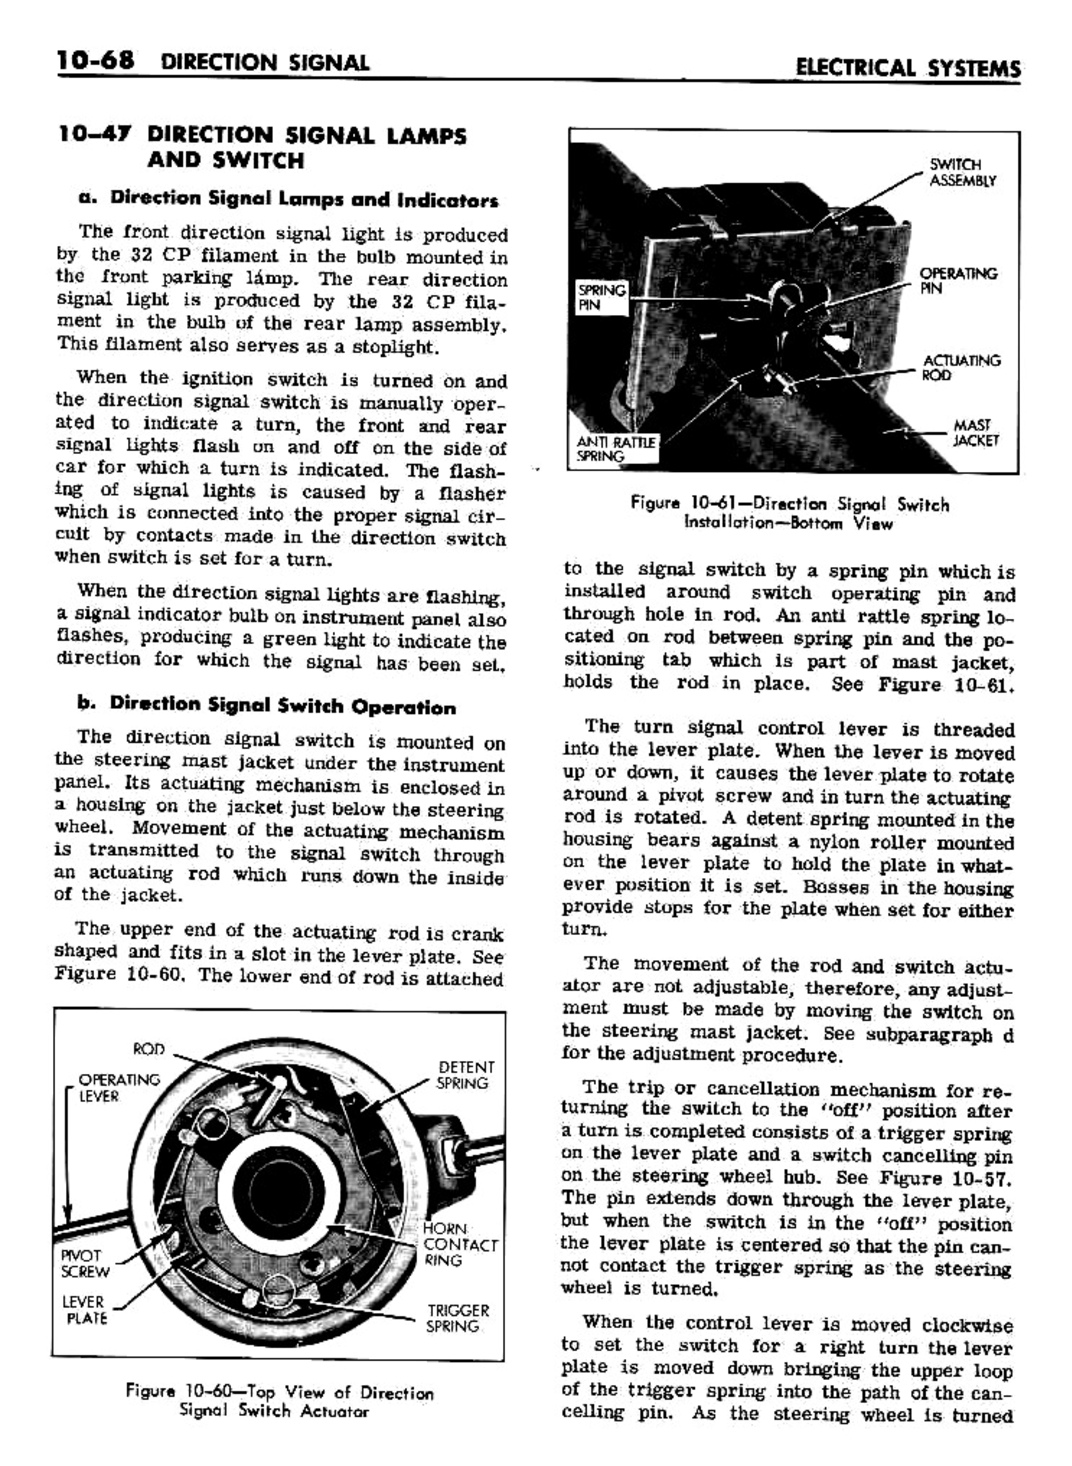 n_10 1961 Buick Shop Manual - Electrical Systems-068-068.jpg